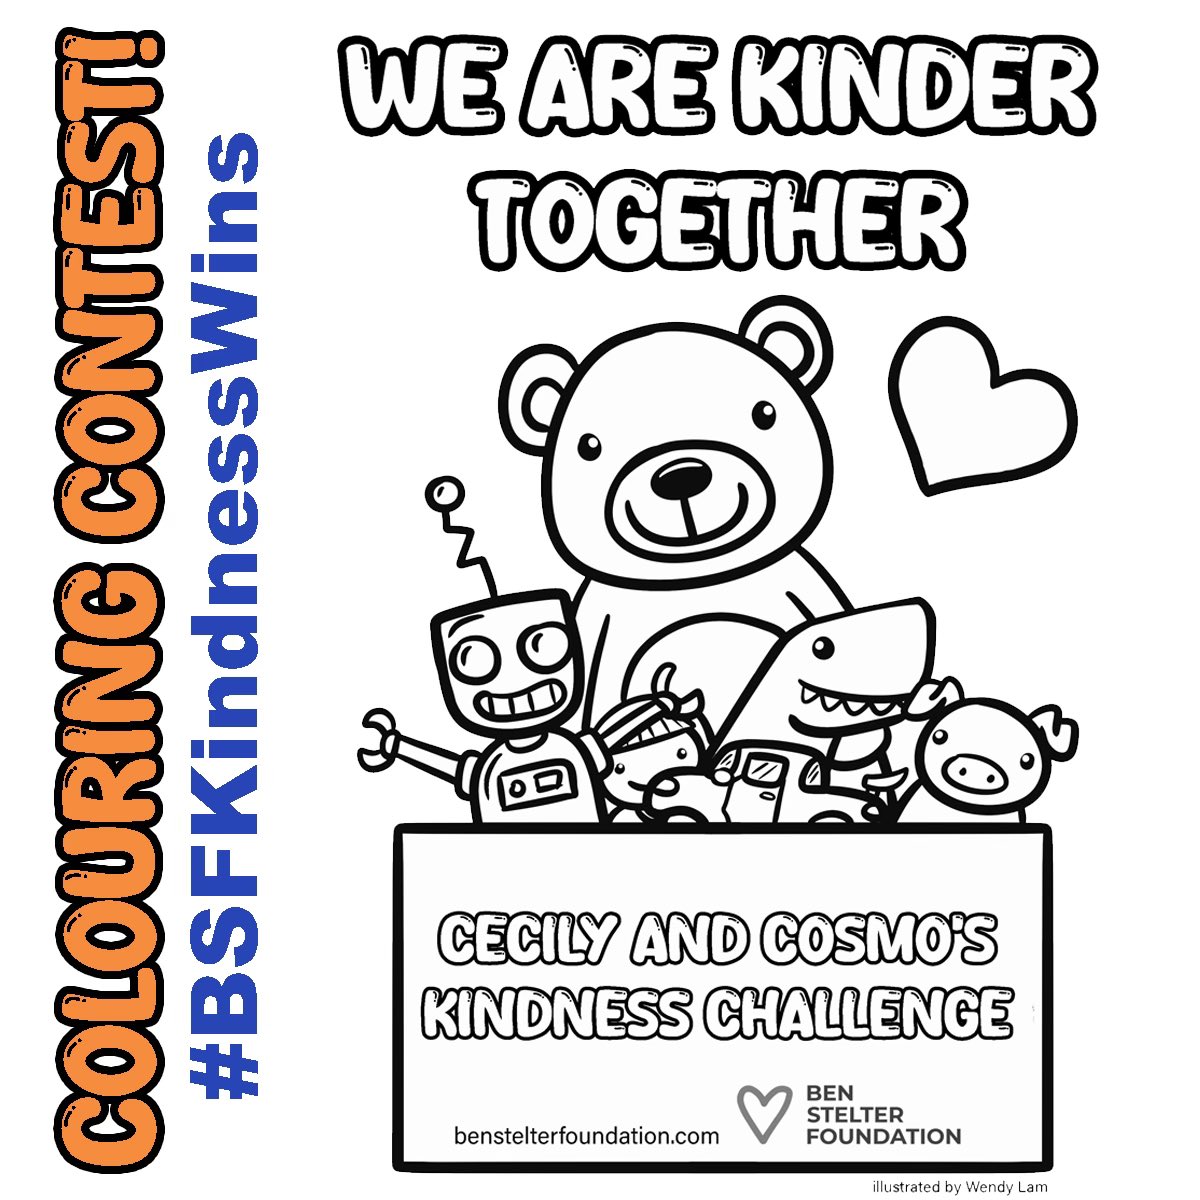 want to WIN some really cool prizes?! cosmo and me have an all ages colouring contest! Just head to benstelterfoundation.com/kindness-chall… to print yours off! Then submit them online and show them off tagging #BSFKindnessWins we can’t wait to see your art! @BenStelterFund #colouringcontest